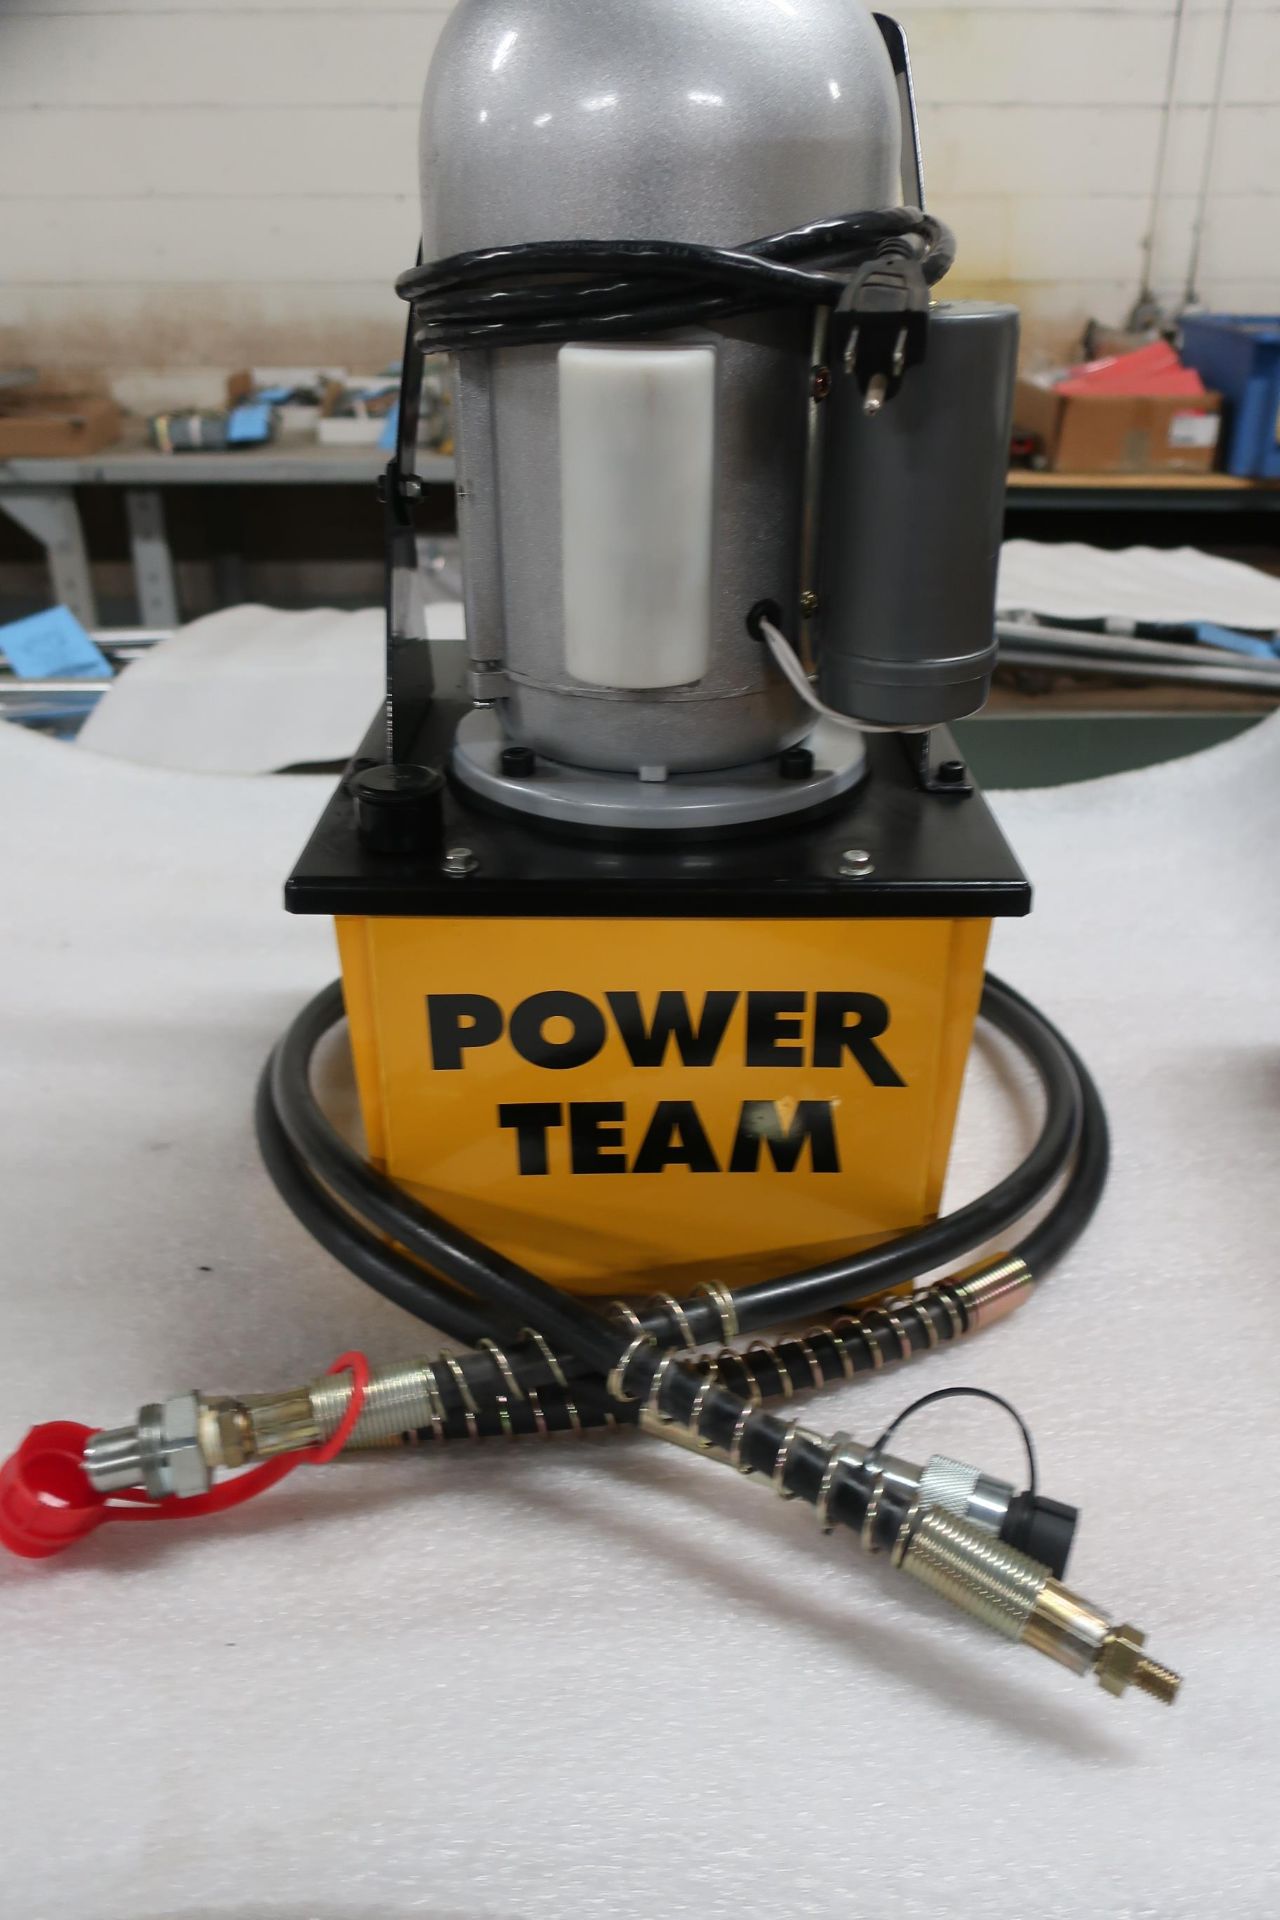 Power Team Hydraulics Electric Powerpack type - 120V single phase hydraulic pump - UNUSED & MINT - Image 2 of 4